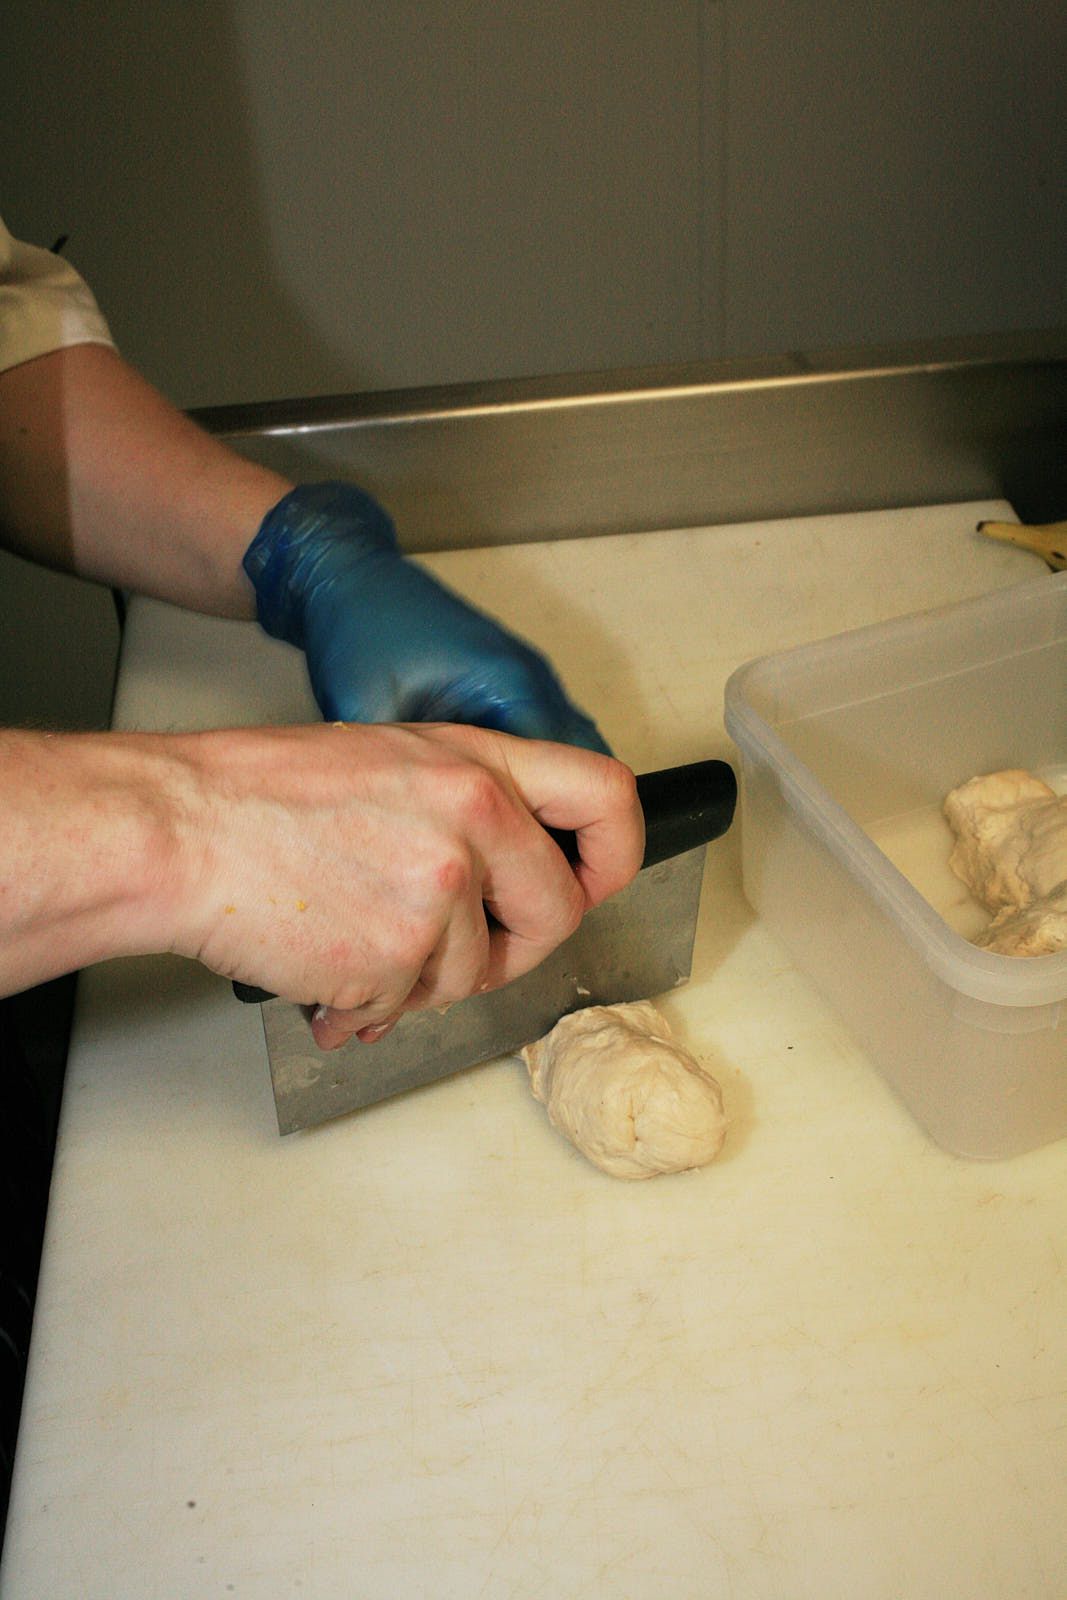 A cook portions dough with a benchscraper.